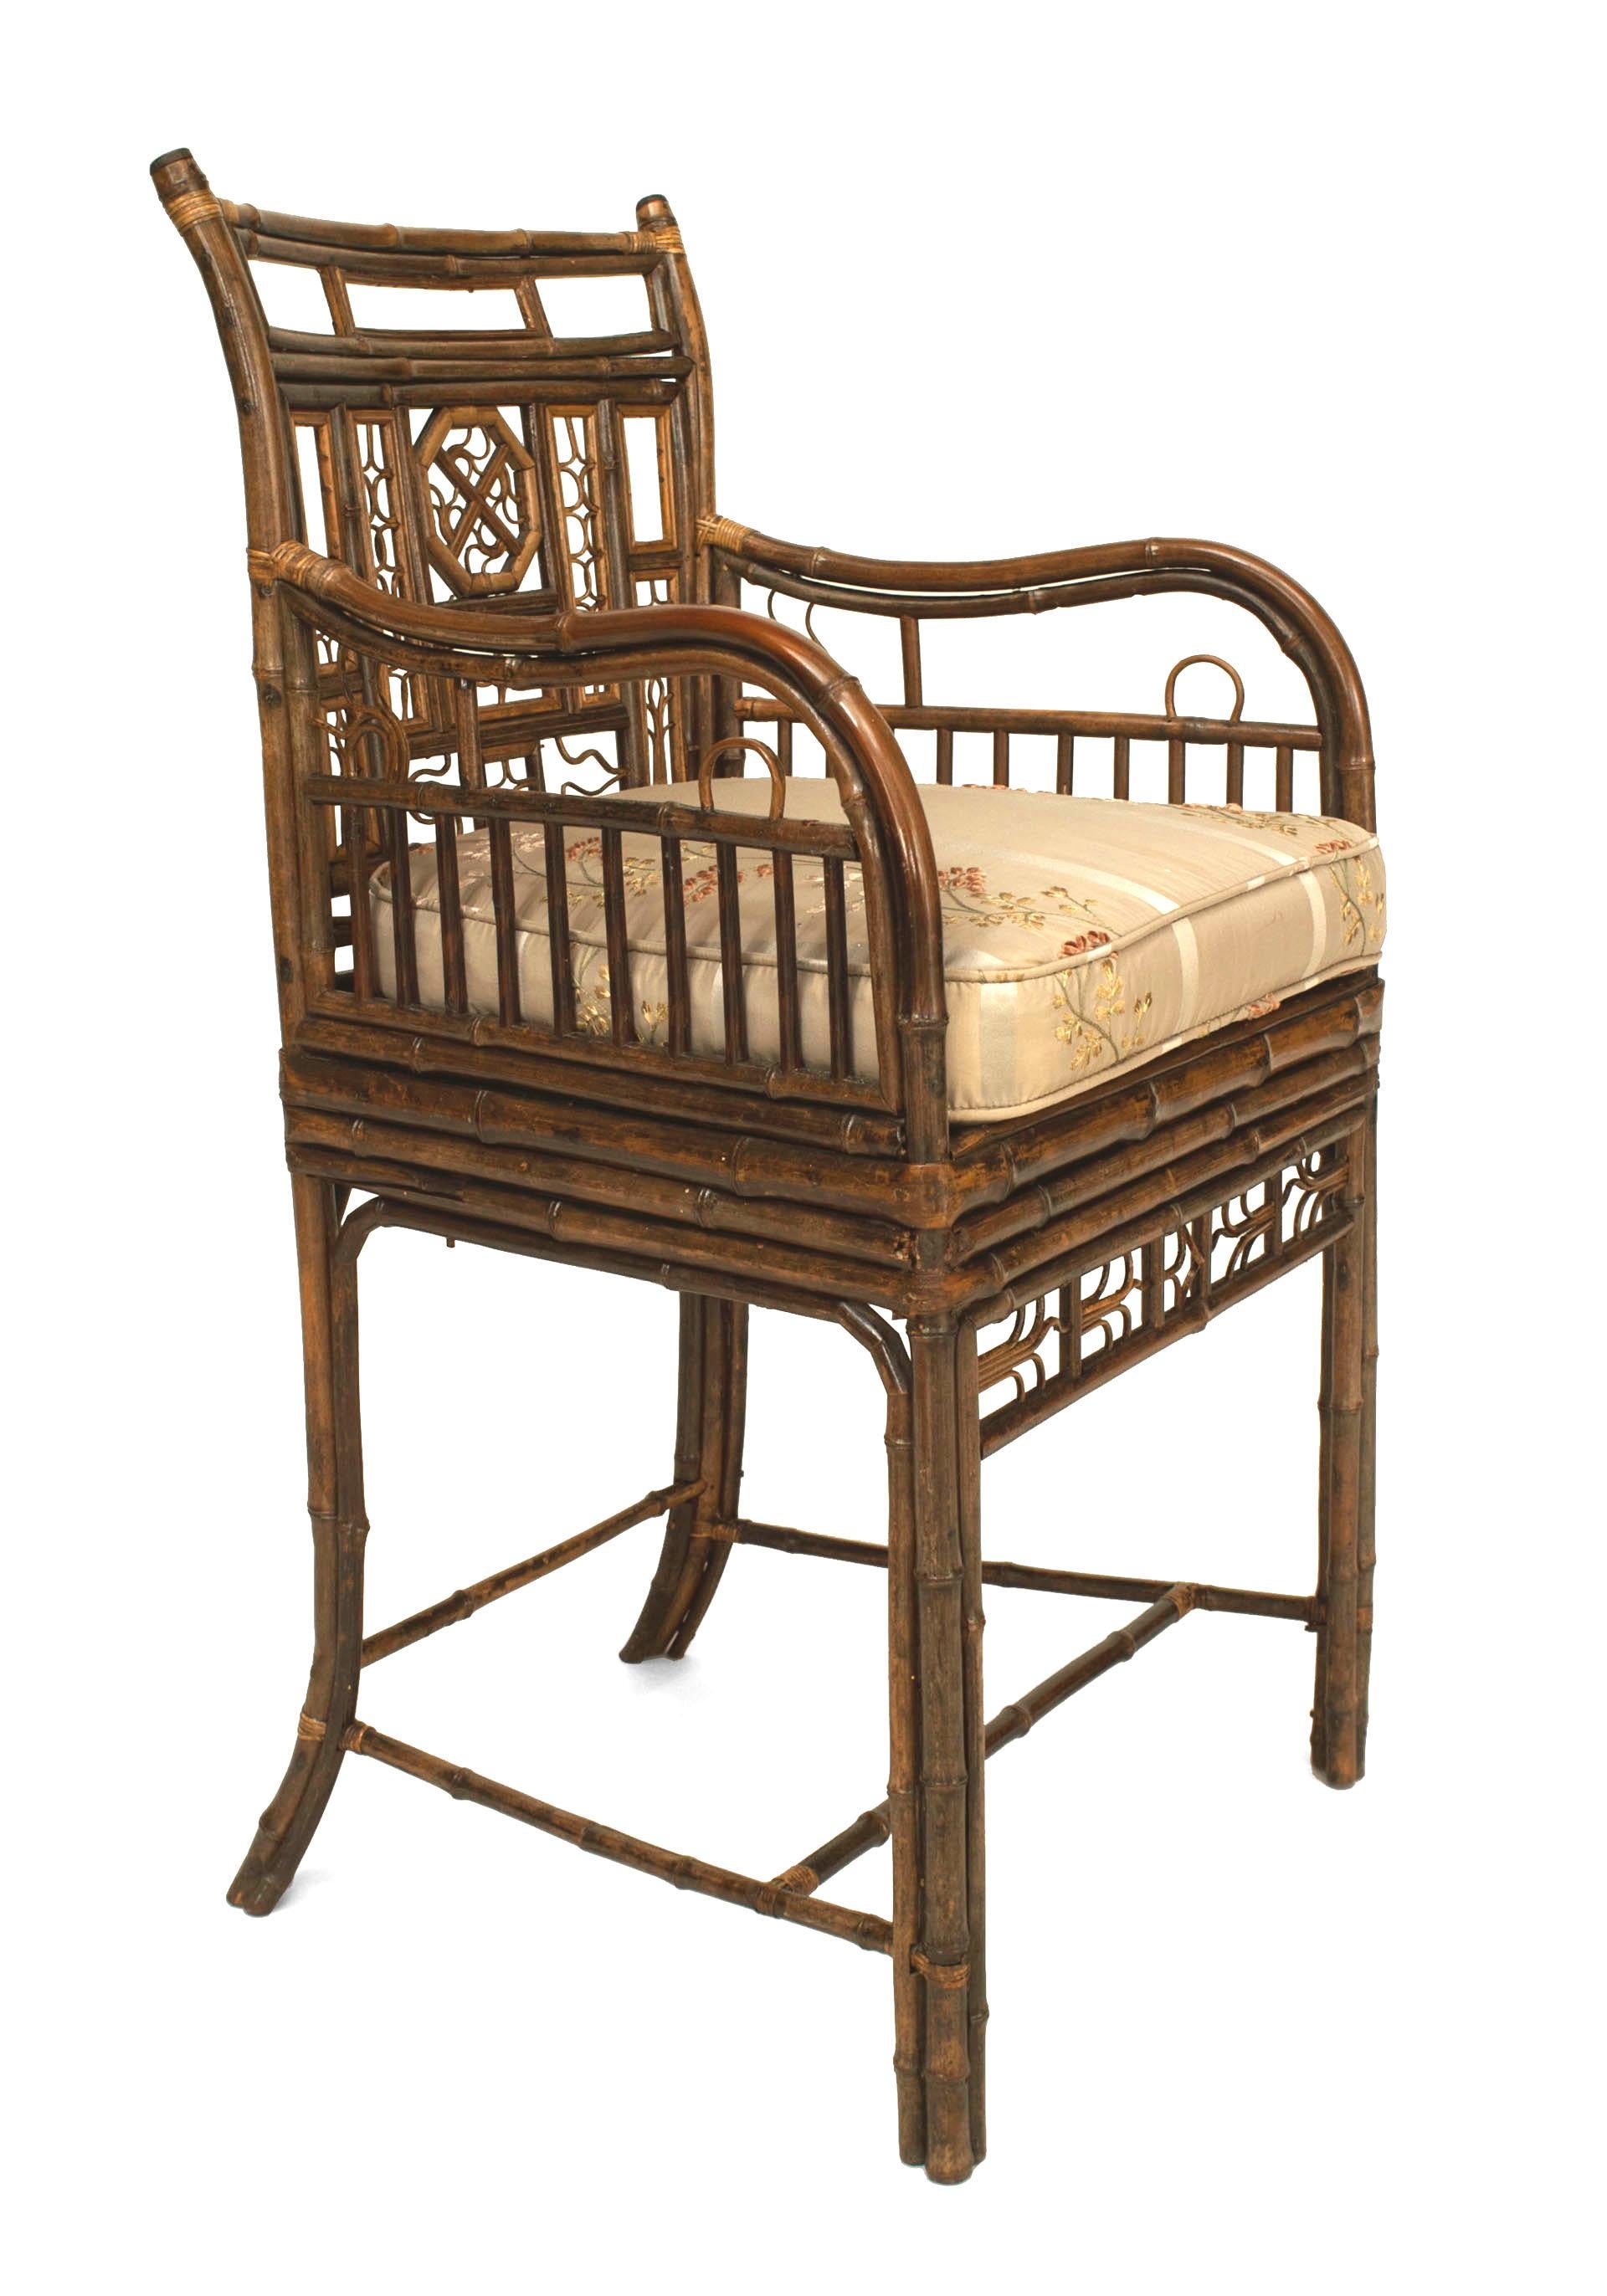 English Regency Brighton design bamboo arm chair with filigree design and a cane seat under a cushion with a stretcher (AS IS-filigree modified) (similar to Inv. #036706)
